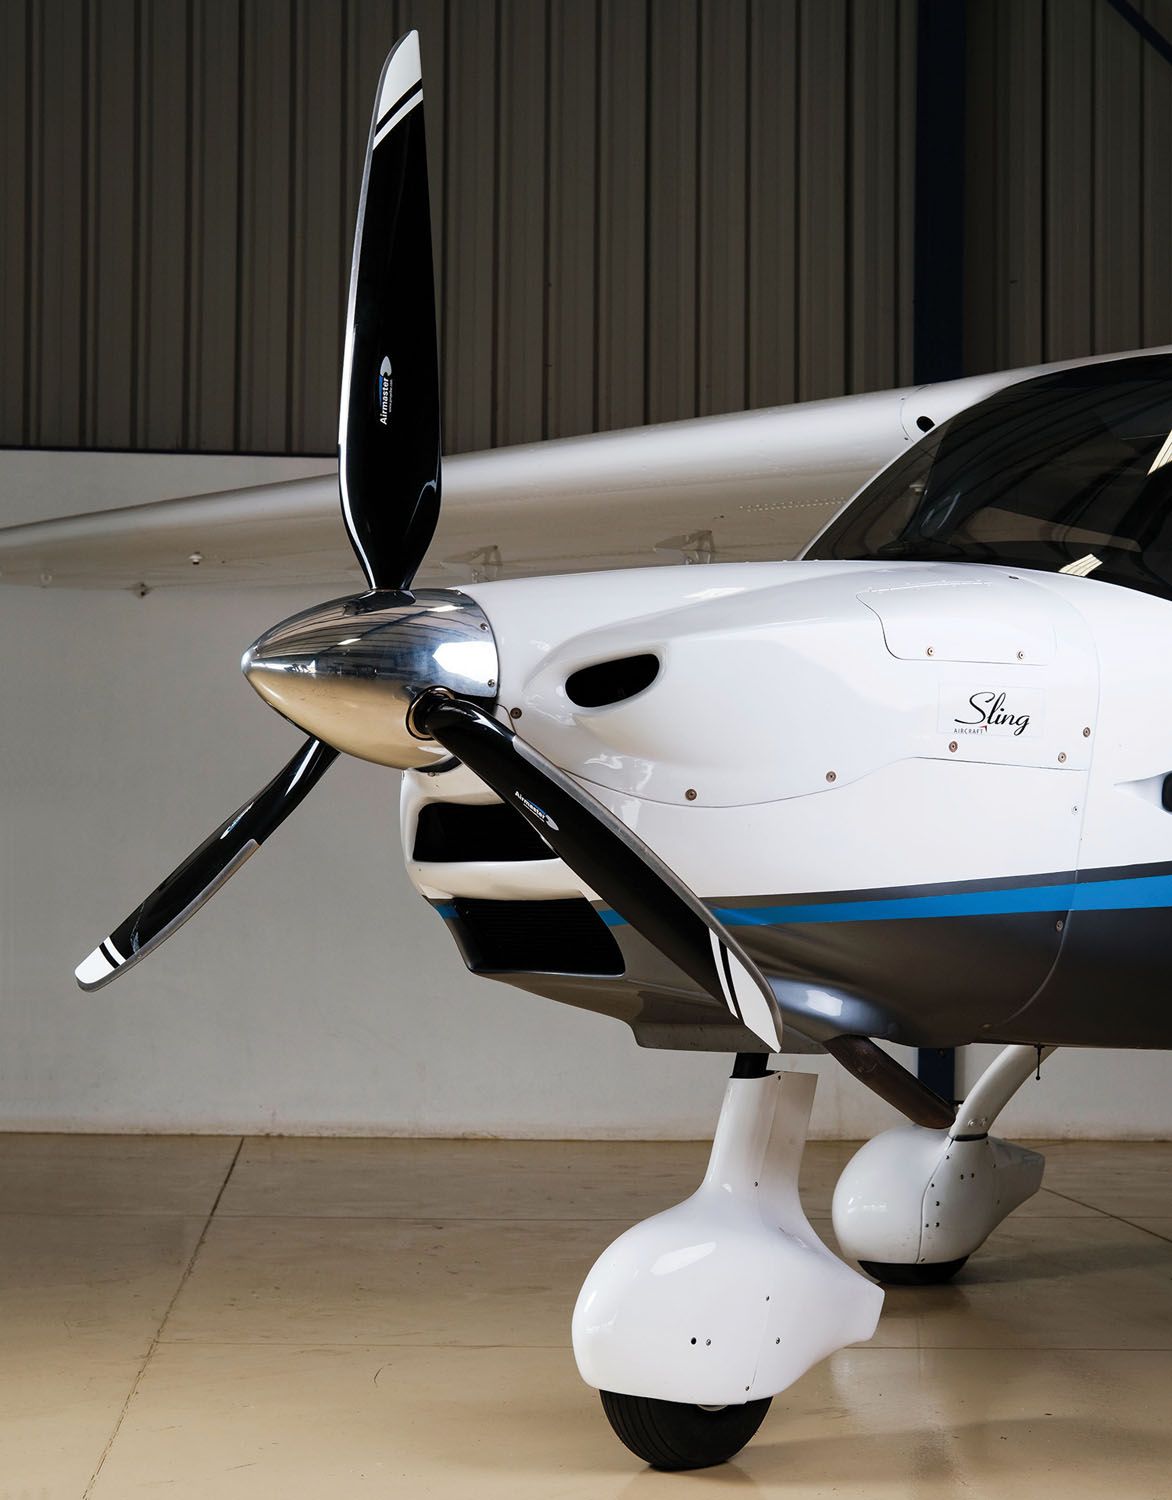 Sling propeller systems, high performance